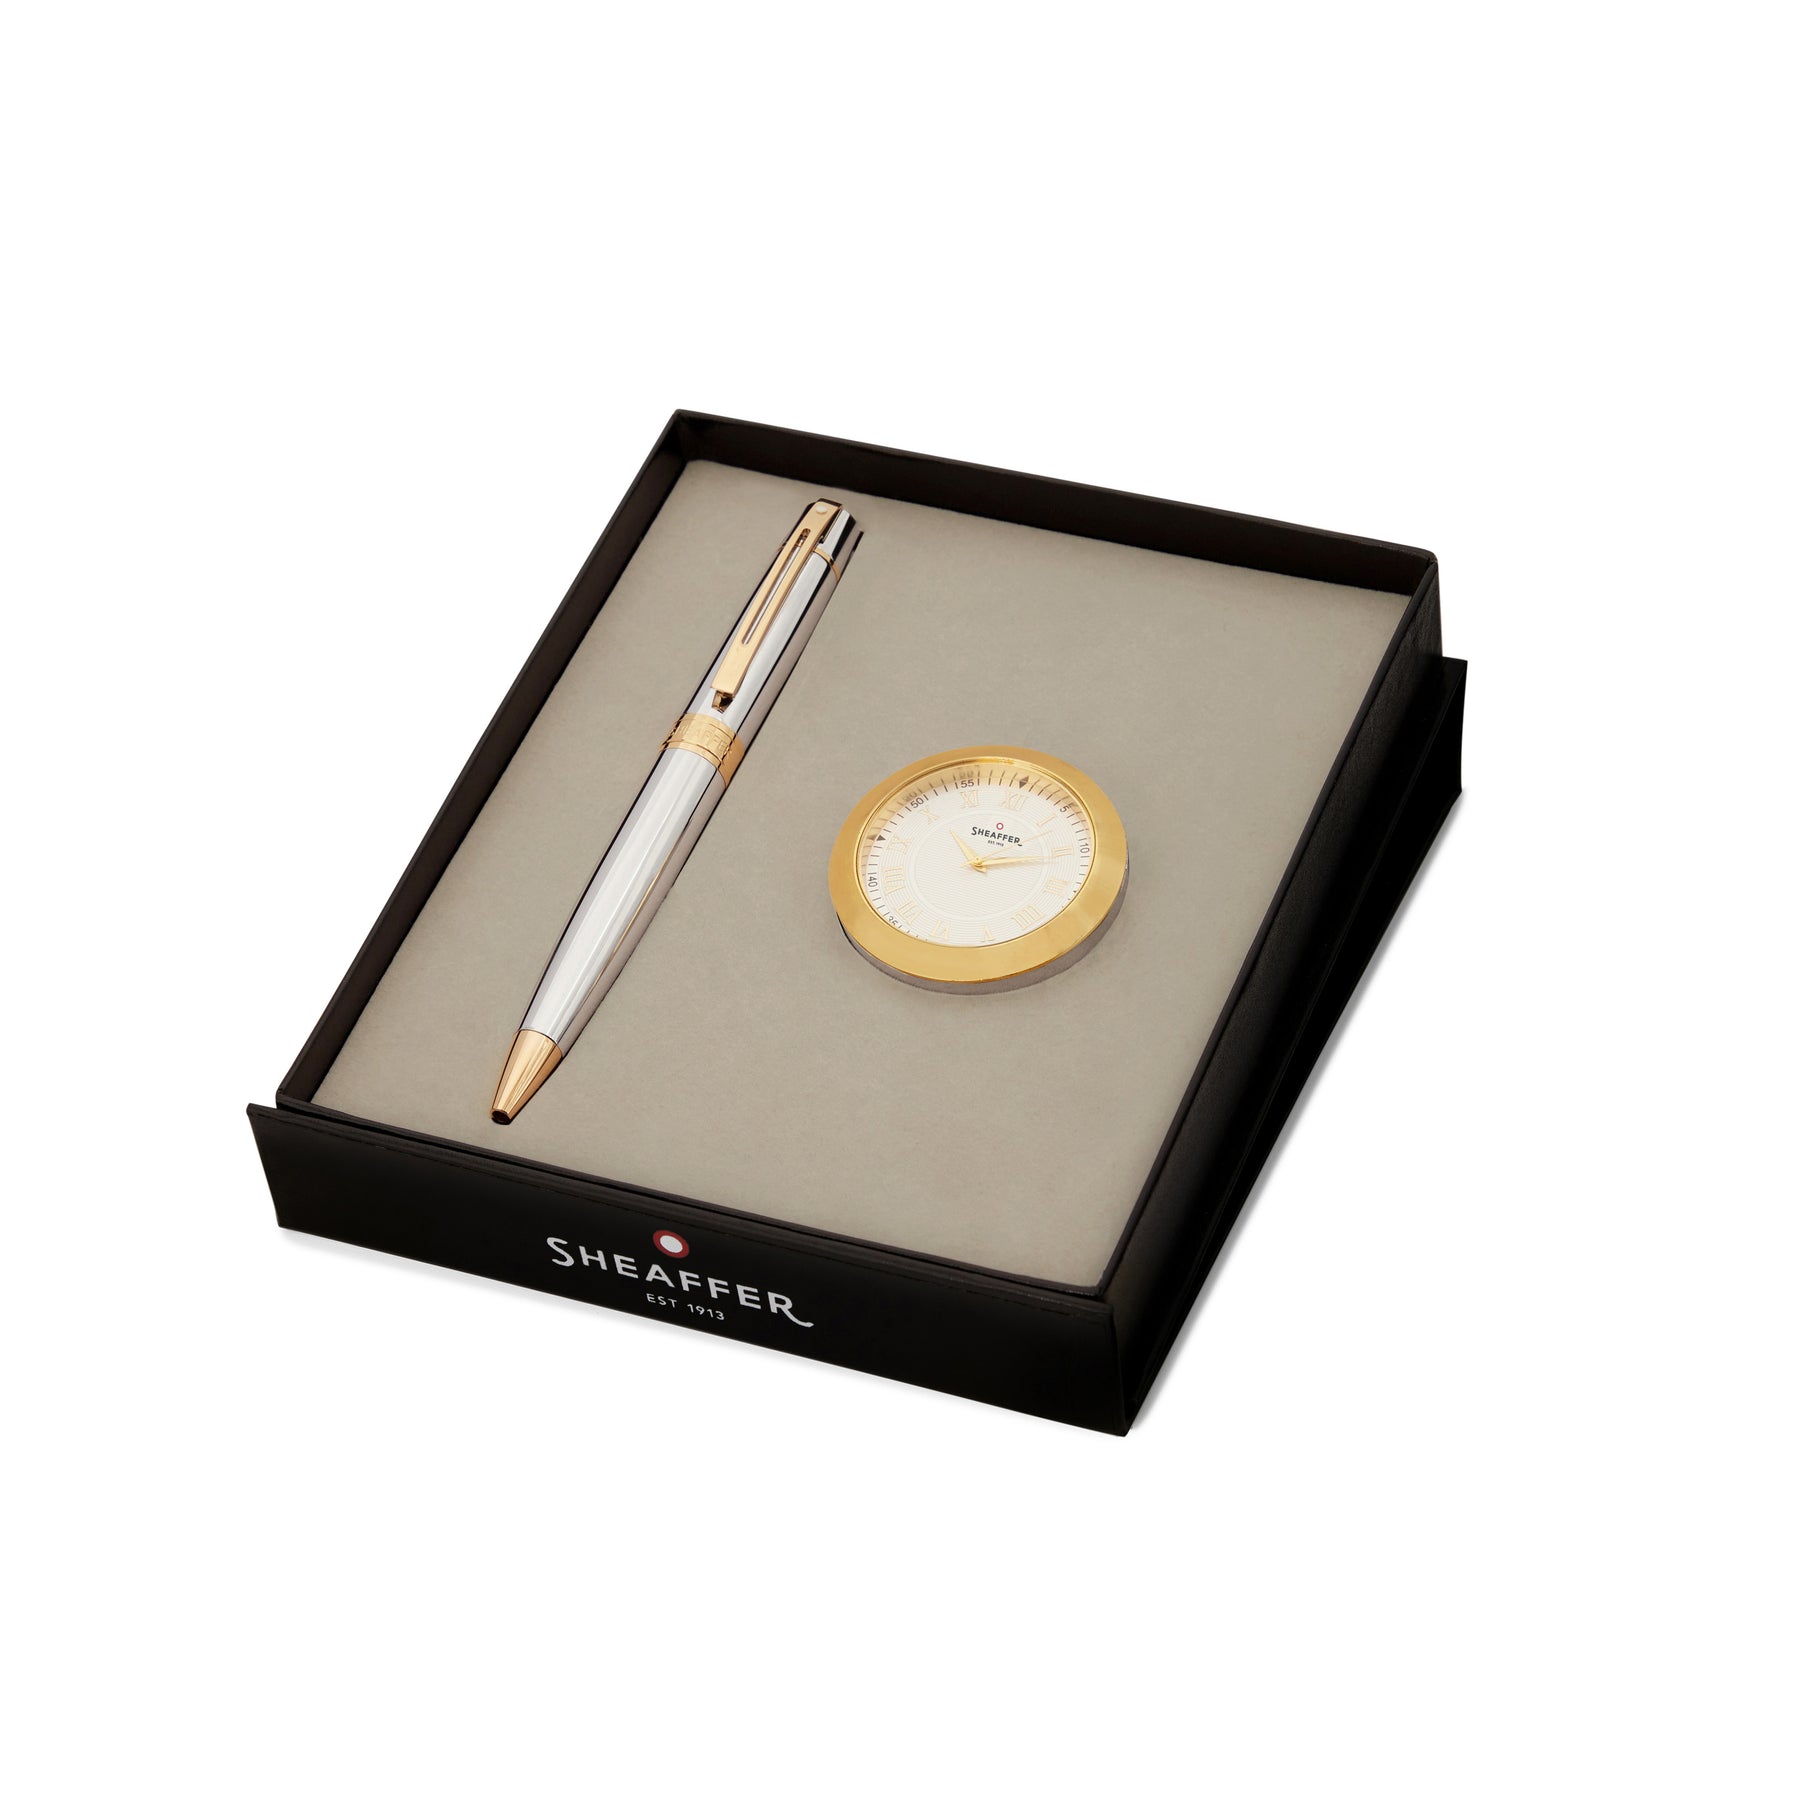 Sheaffer Gift Set ft. Bright Chrome 300 Ballpoint Pen with Gold Trims and Table Clock